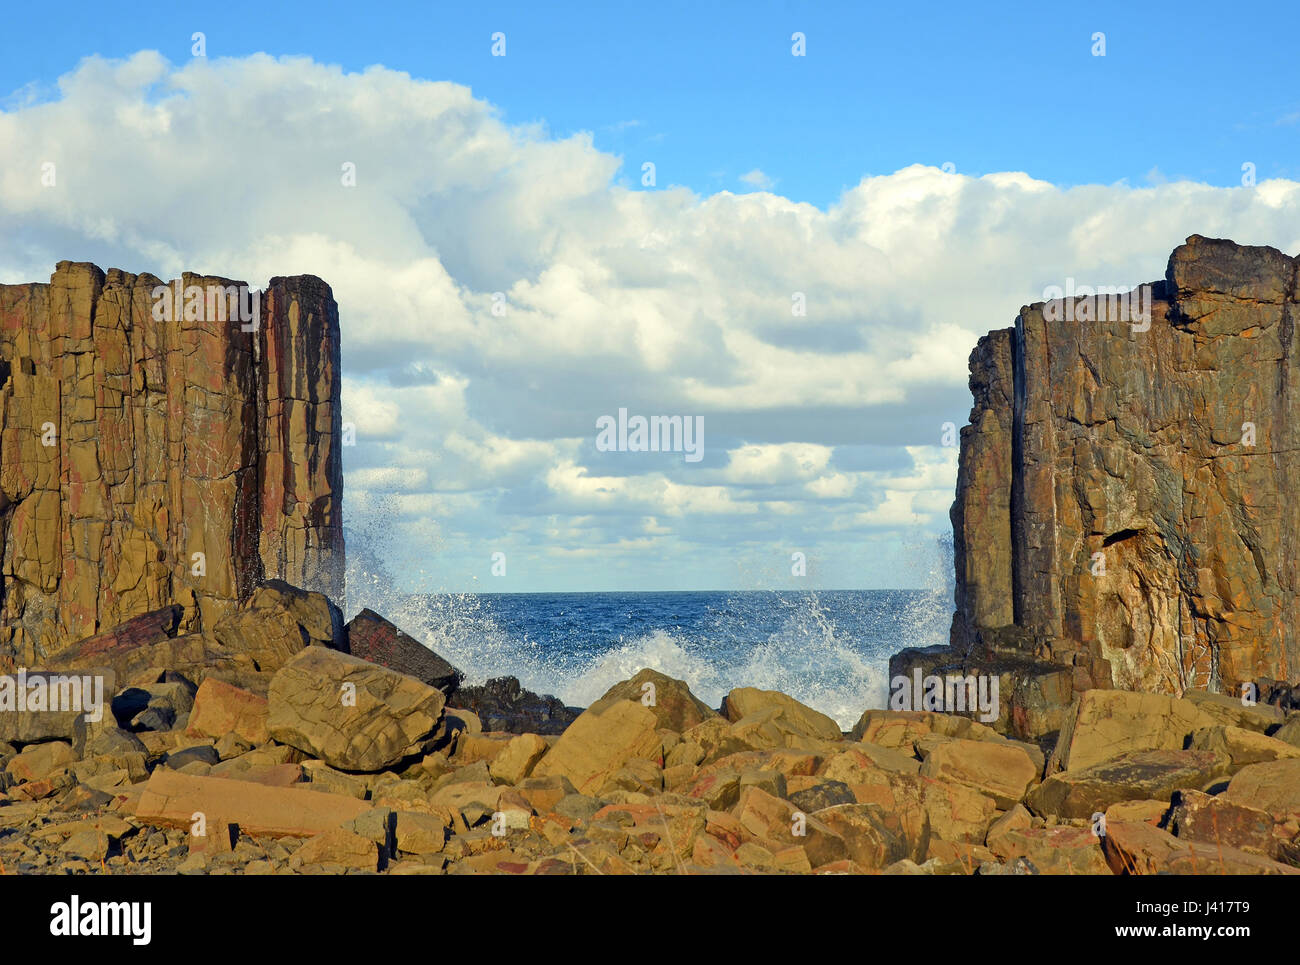 Waves breaking in the gap between basalt rock formations with a view to the sea at Bombo Headland quarry, New South Wales coast, Australia Stock Photo